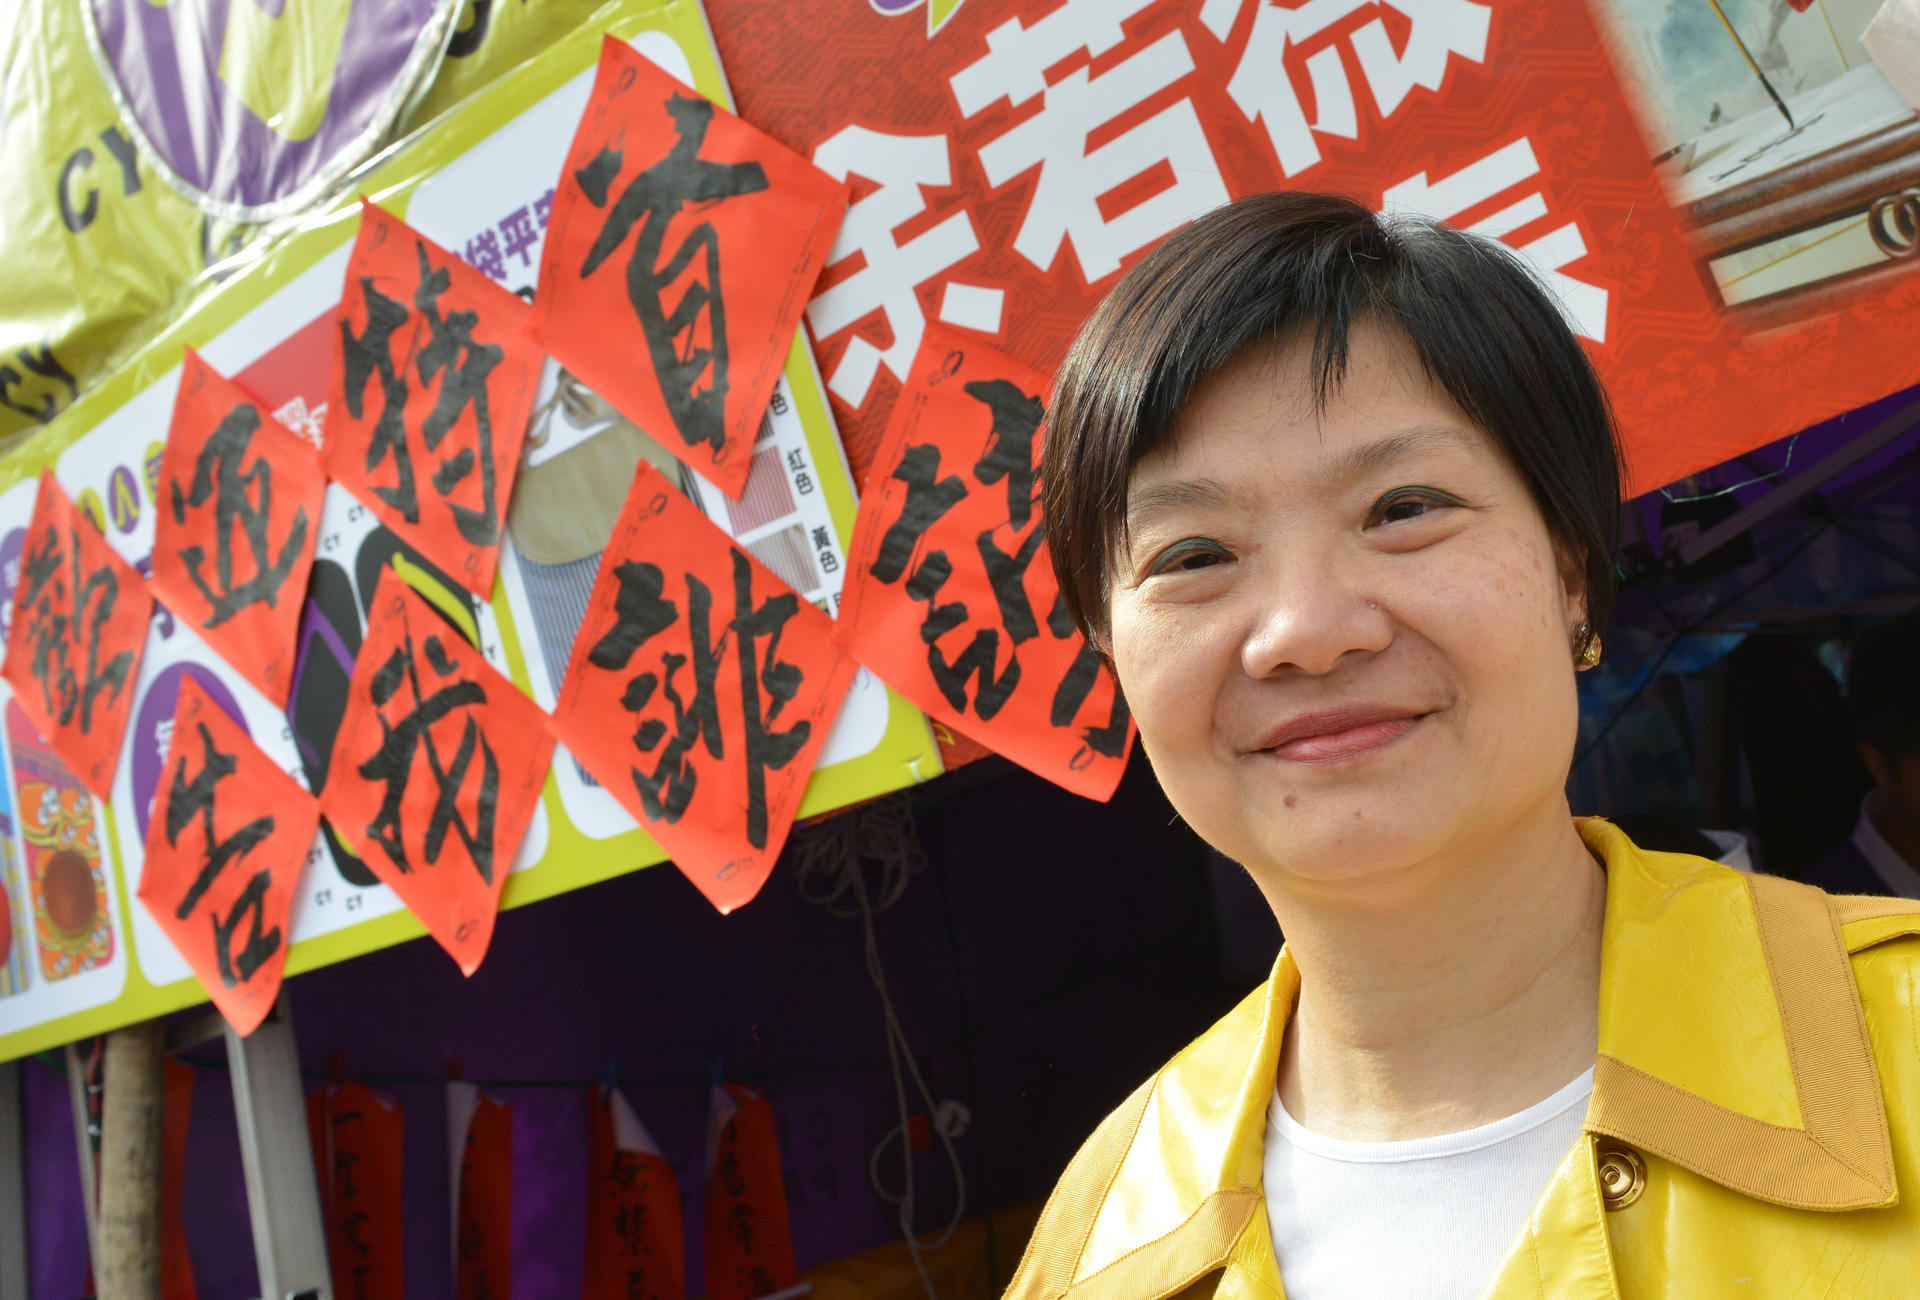 Audrey Eu, chairman of the Civic Party poses yesterday with the couplets she wrote, inviting the chief executive to sue her for defamation, in a reference to the news that C.Y. Leung had sent a legal letter to the Economic Journal. Photo: Thomas Yau